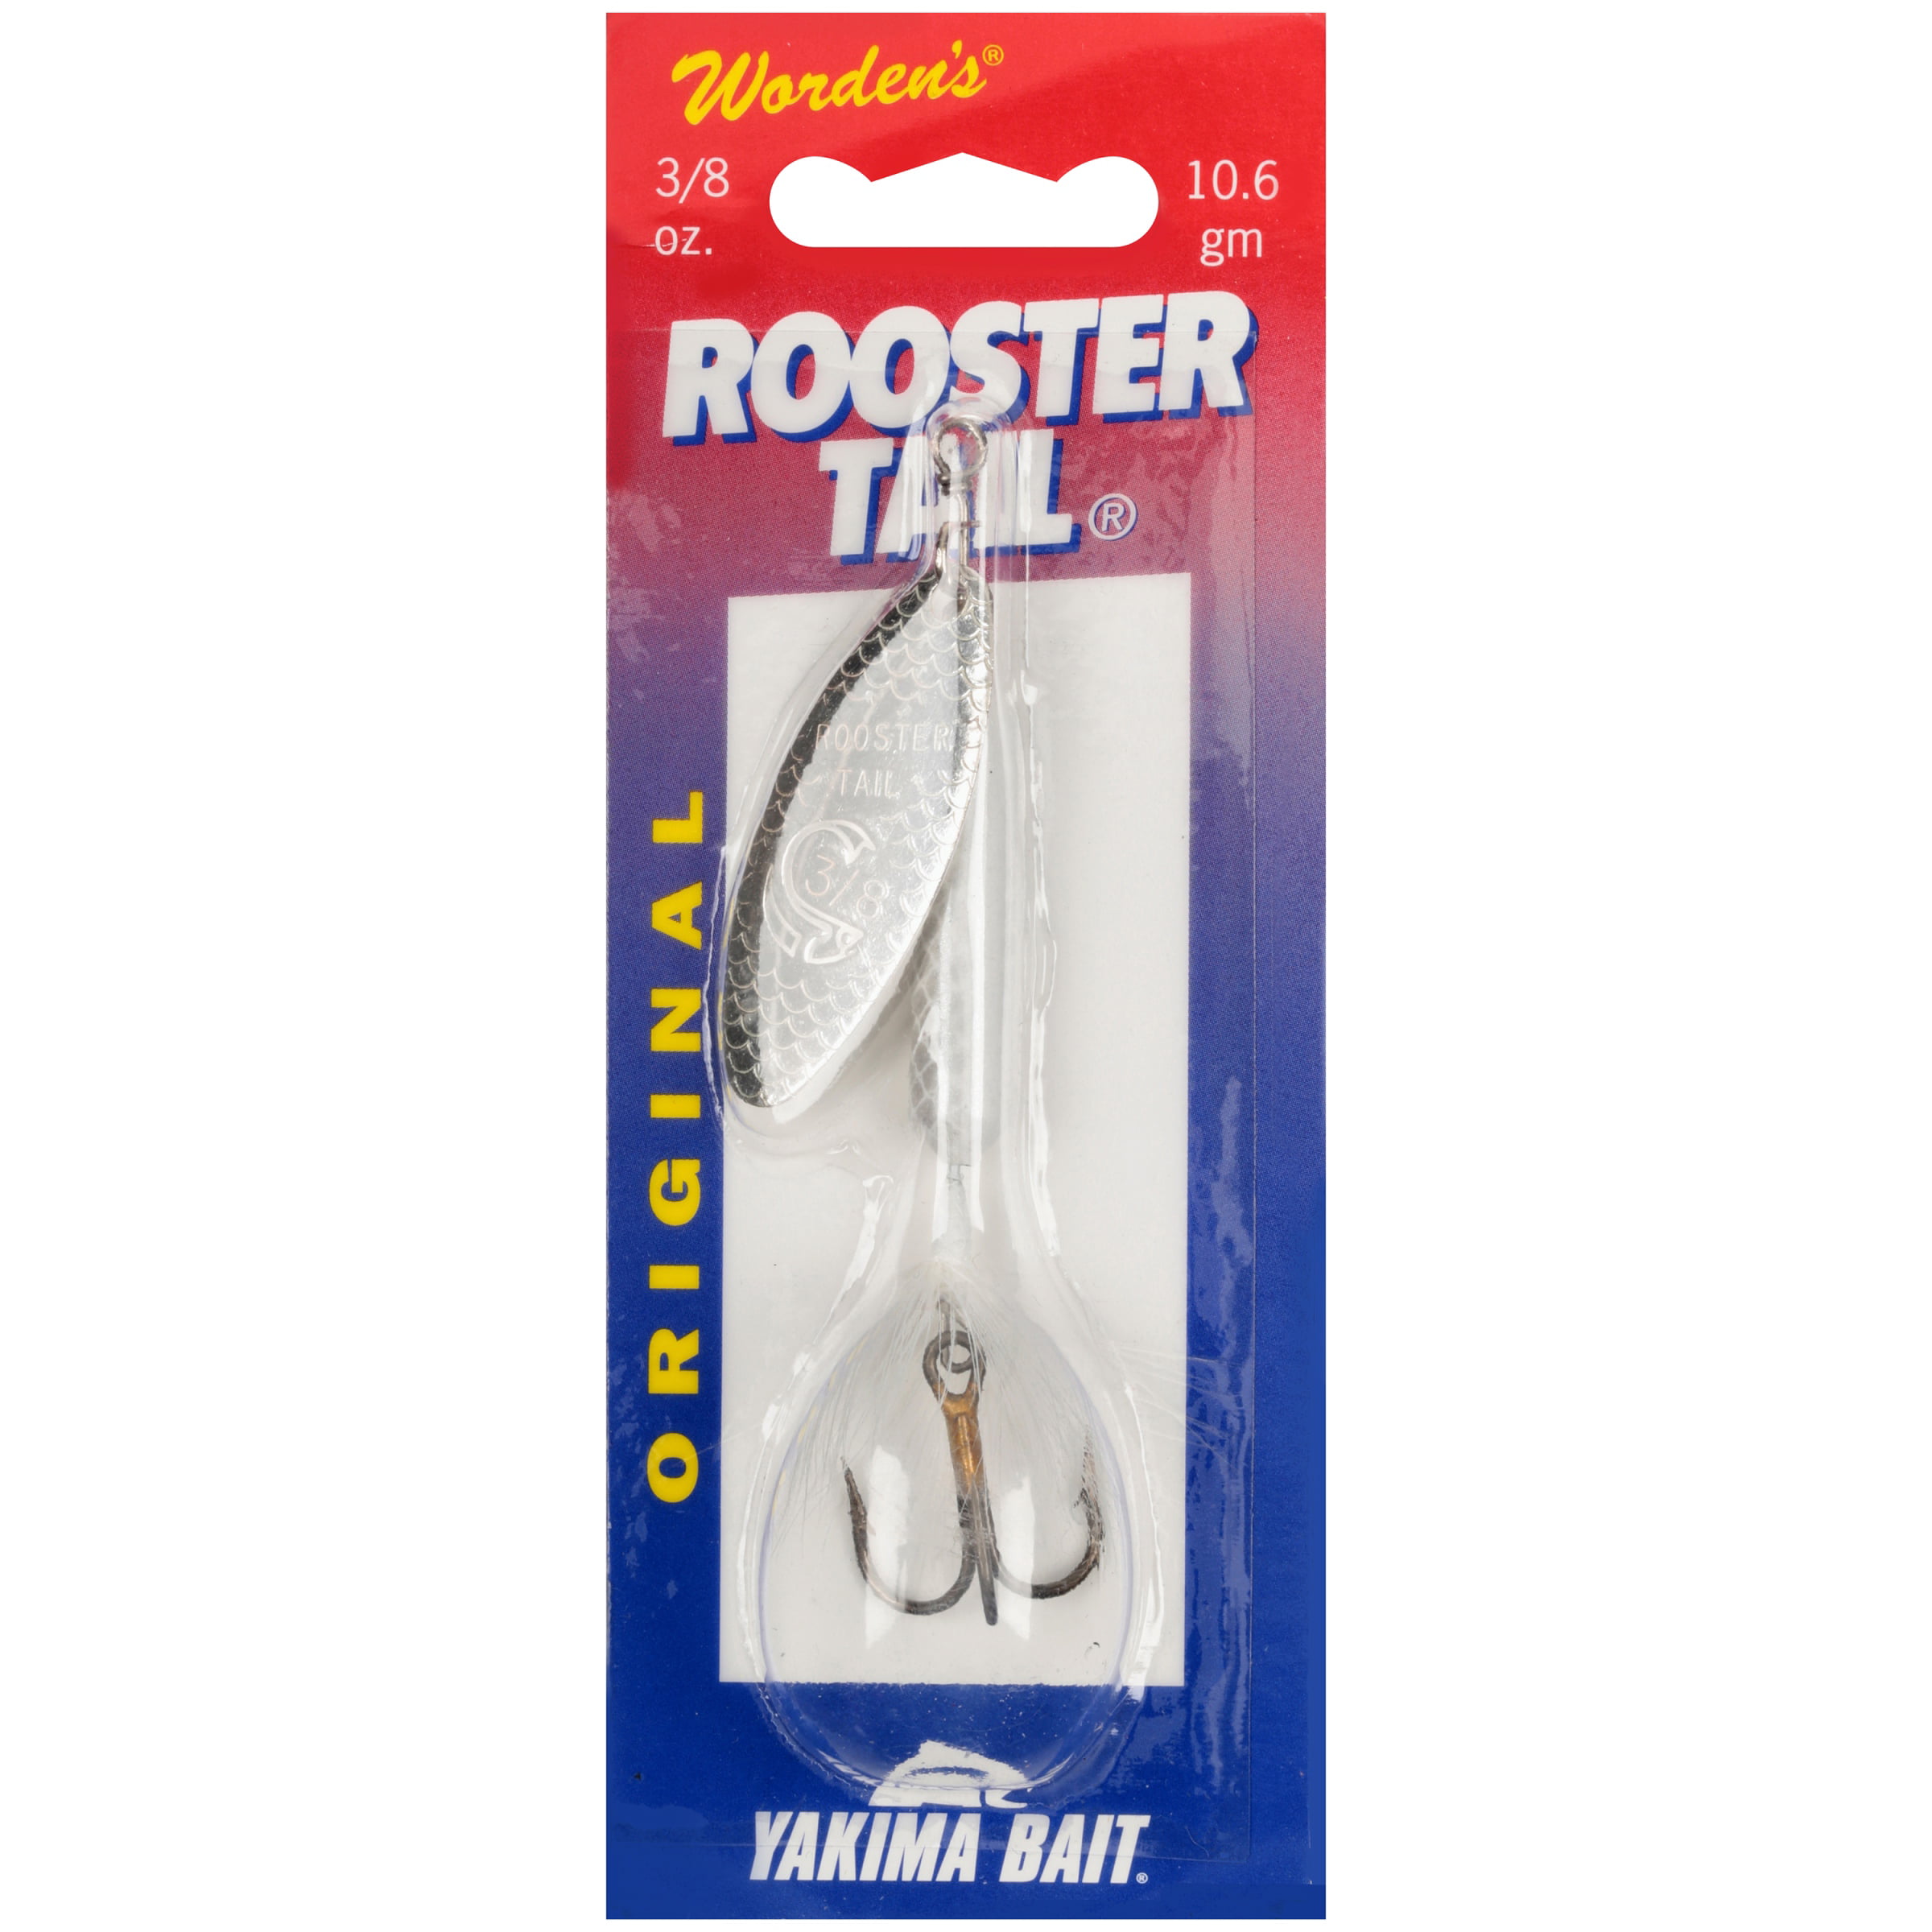 Worden's® Original White Rooster Tail®, Inline Spinnerbait Fishing